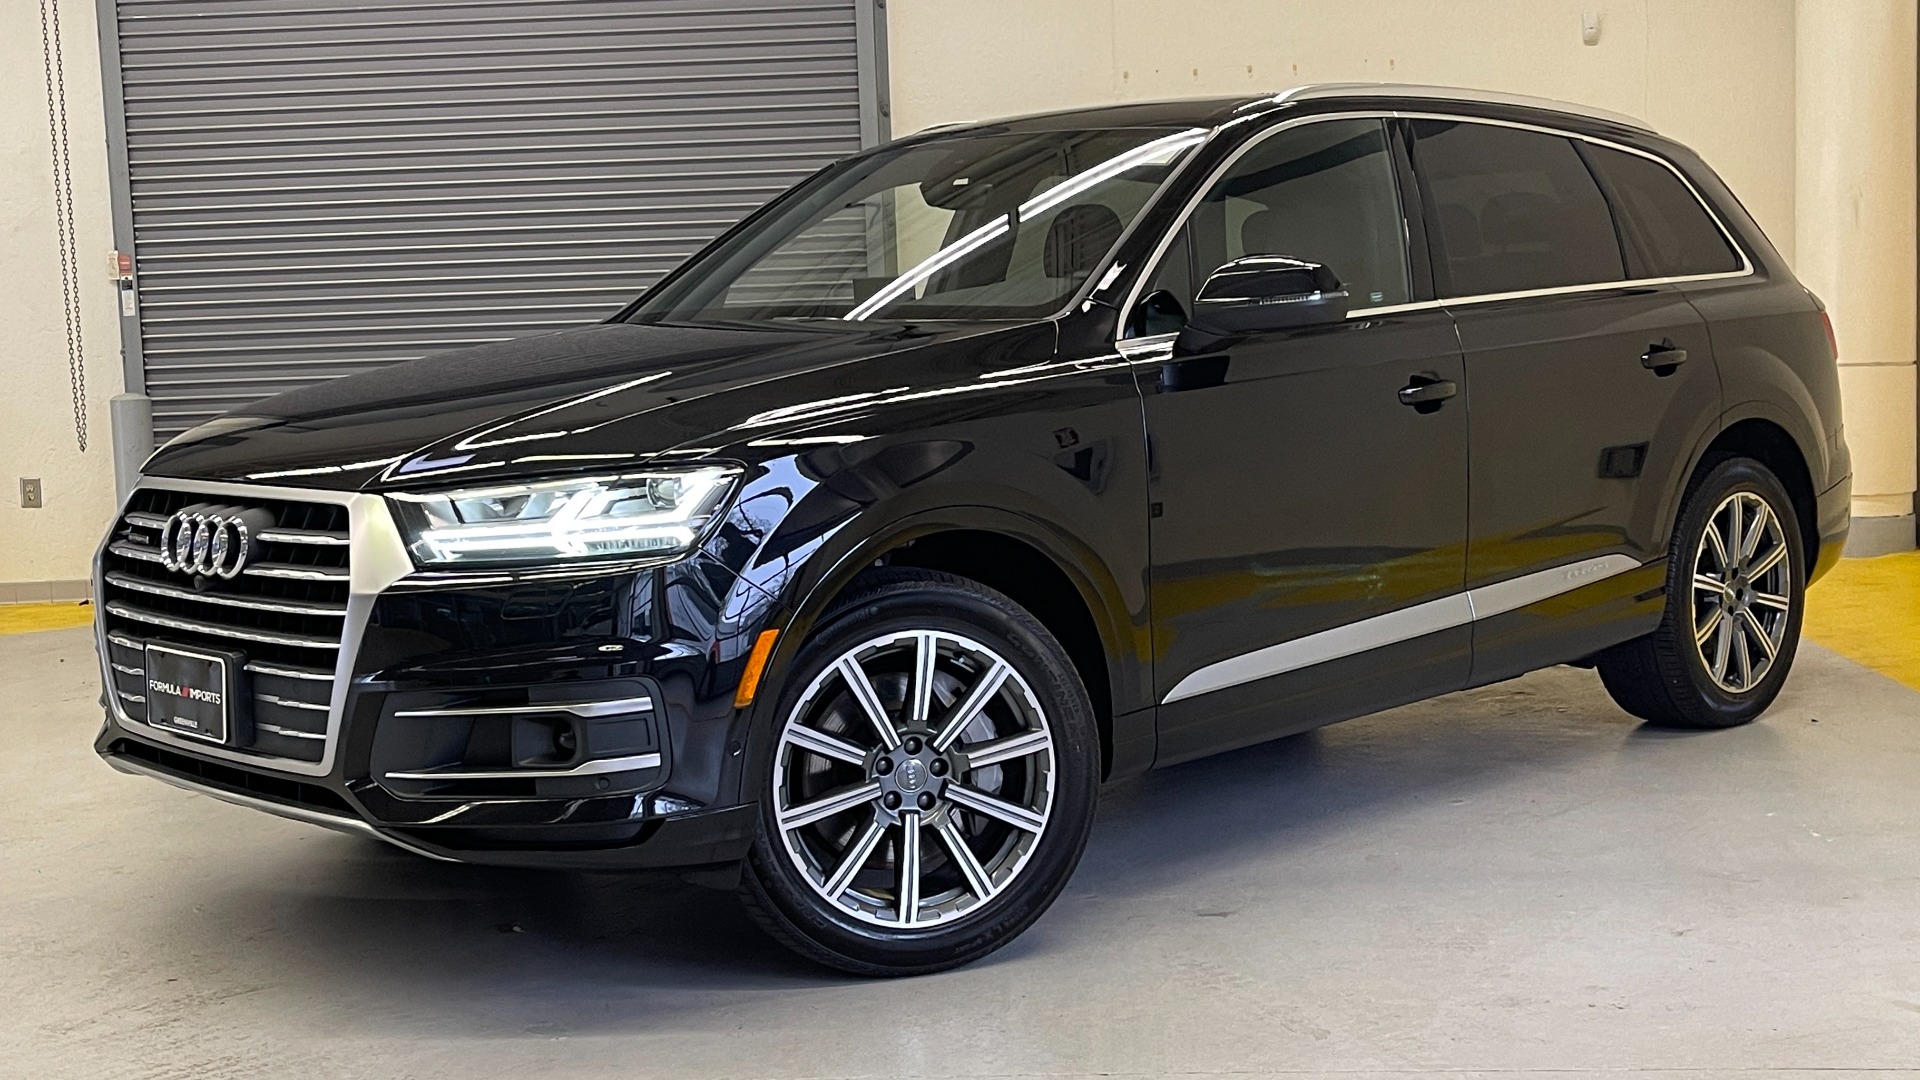 Used 2019 Audi Q7 PREMIUM PLUS / NAV / SUNROOF / DRVR ASST / COLD WTHR / 20IN WHLS / REARVIEW for sale Sold at Formula Imports in Charlotte NC 28227 1